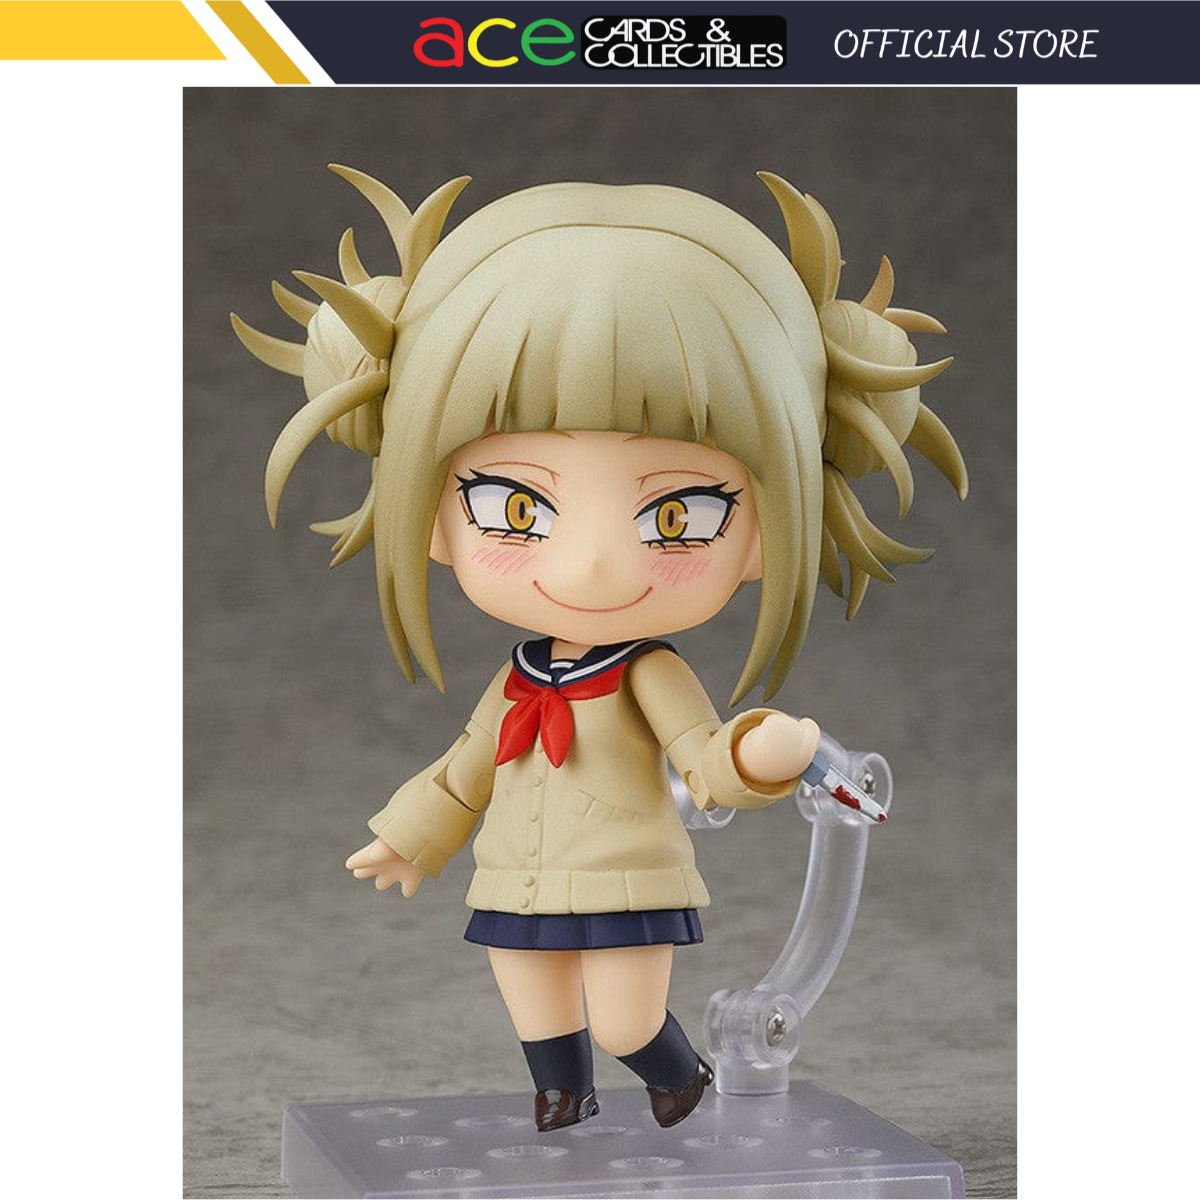 My Hero Academia Nendoroid "Himiko Toga" (3rd-run)-Tomy-Ace Cards & Collectibles